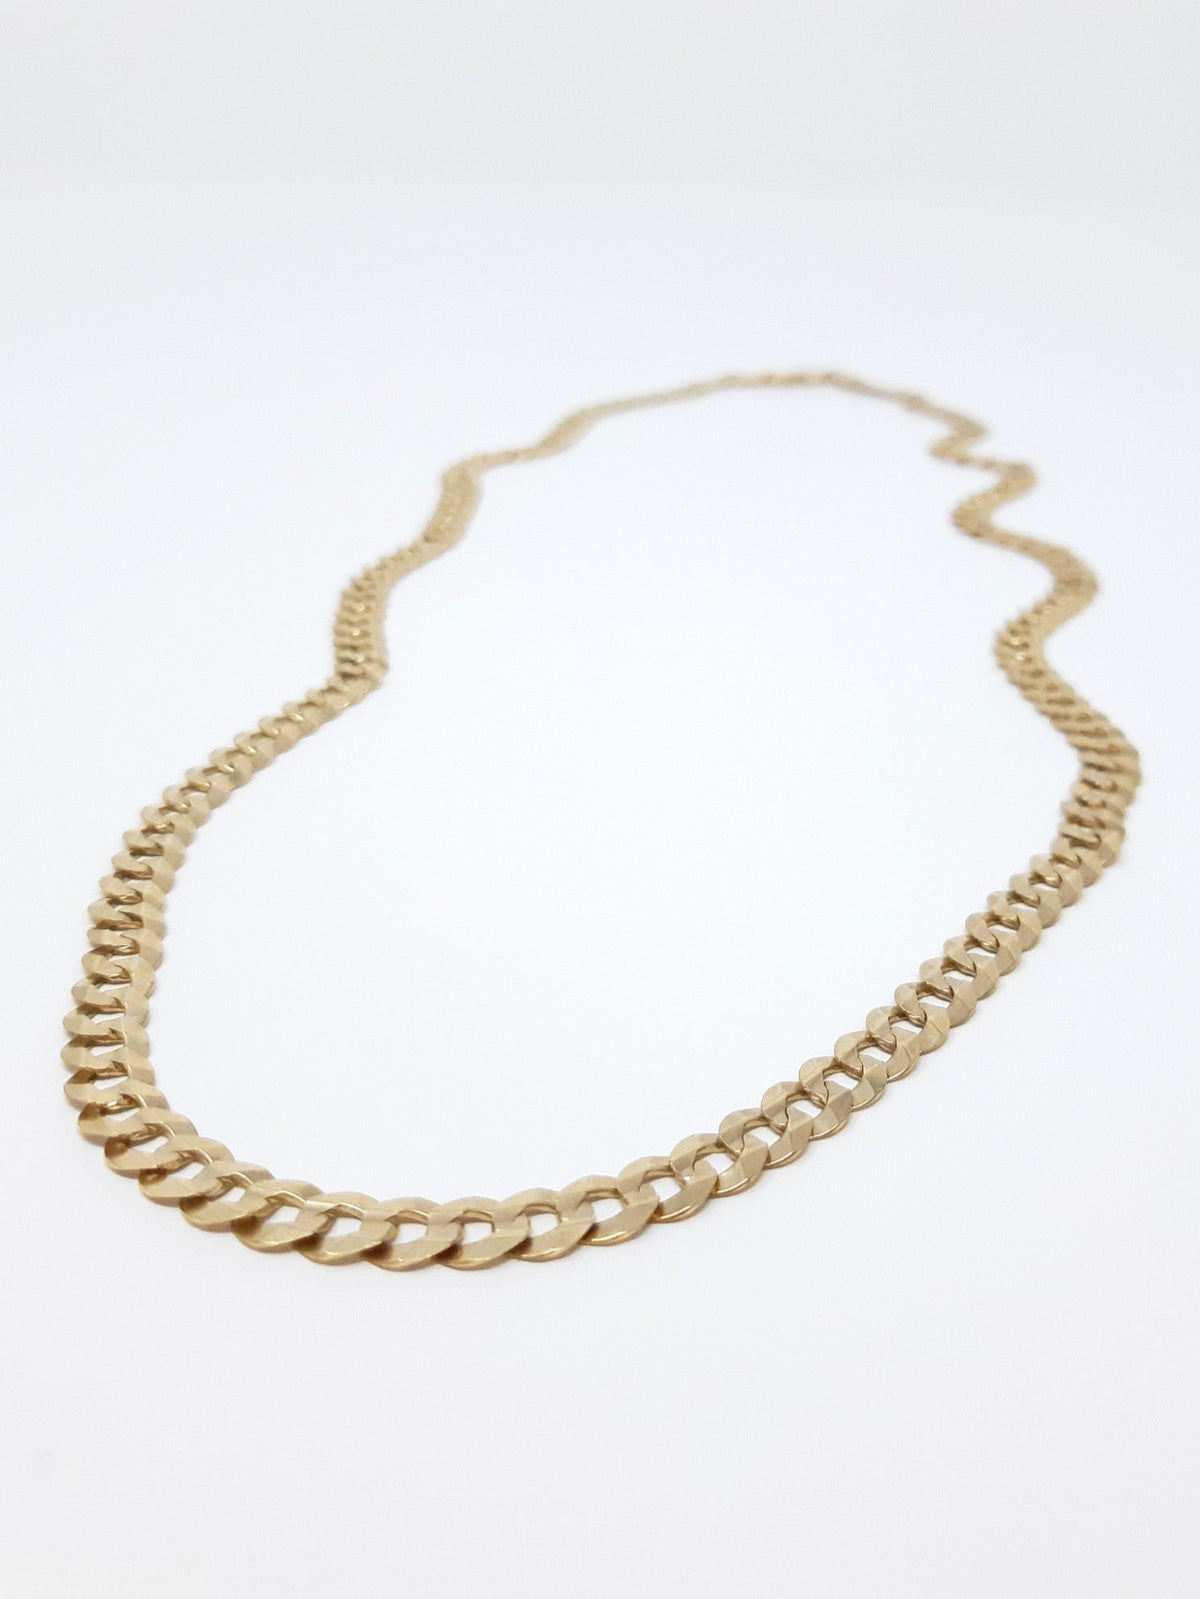 10K Yellow Gold 3.6mm Curb Chain with Lobster Claw - 24 Inches